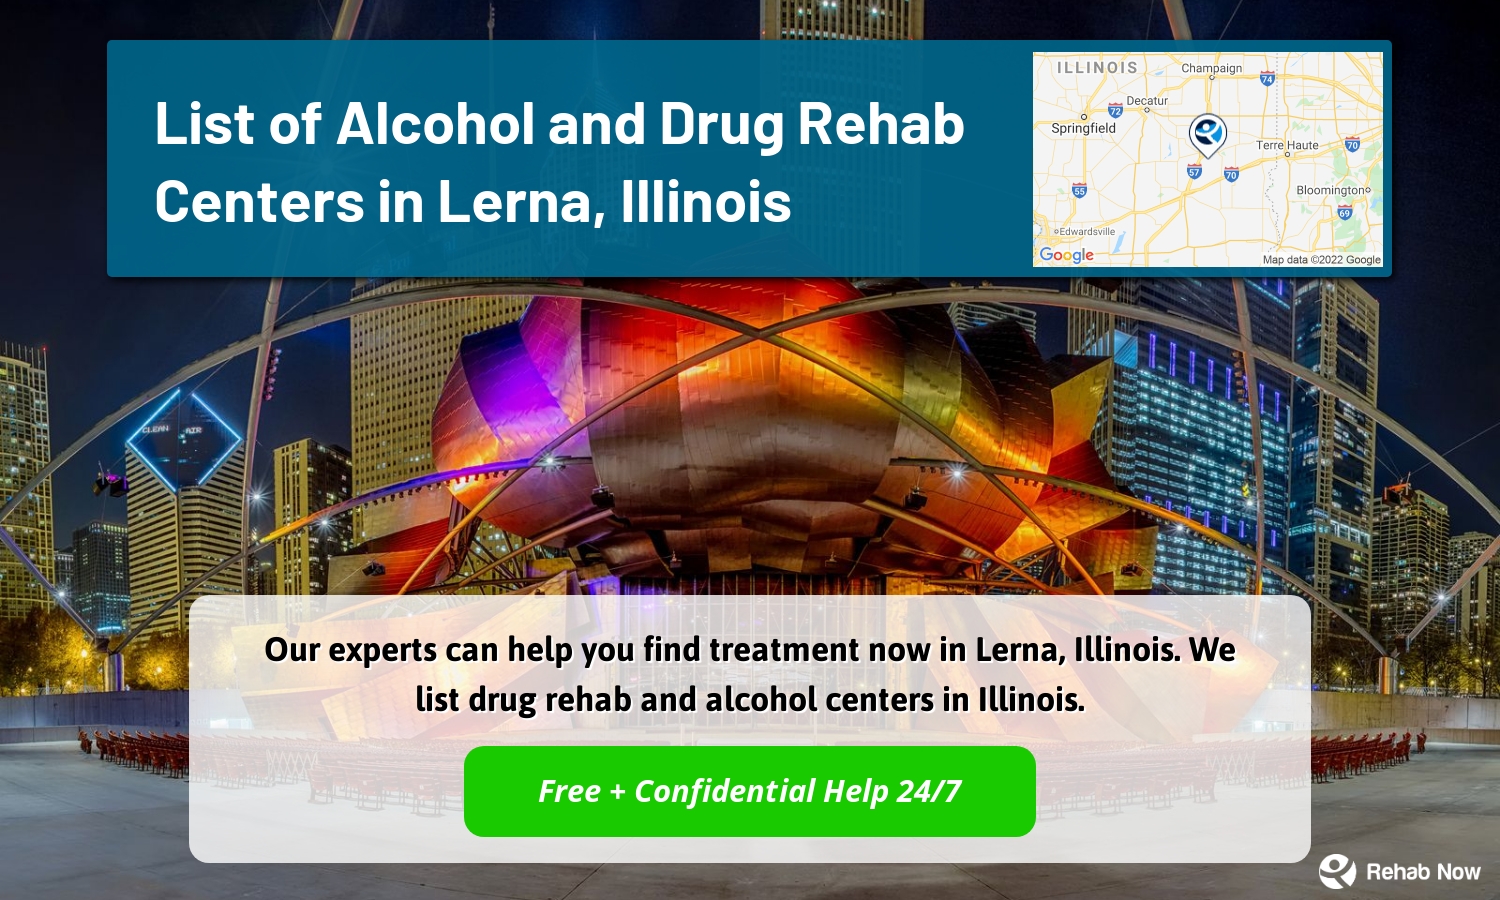 Our experts can help you find treatment now in Lerna, Illinois. We list drug rehab and alcohol centers in Illinois.